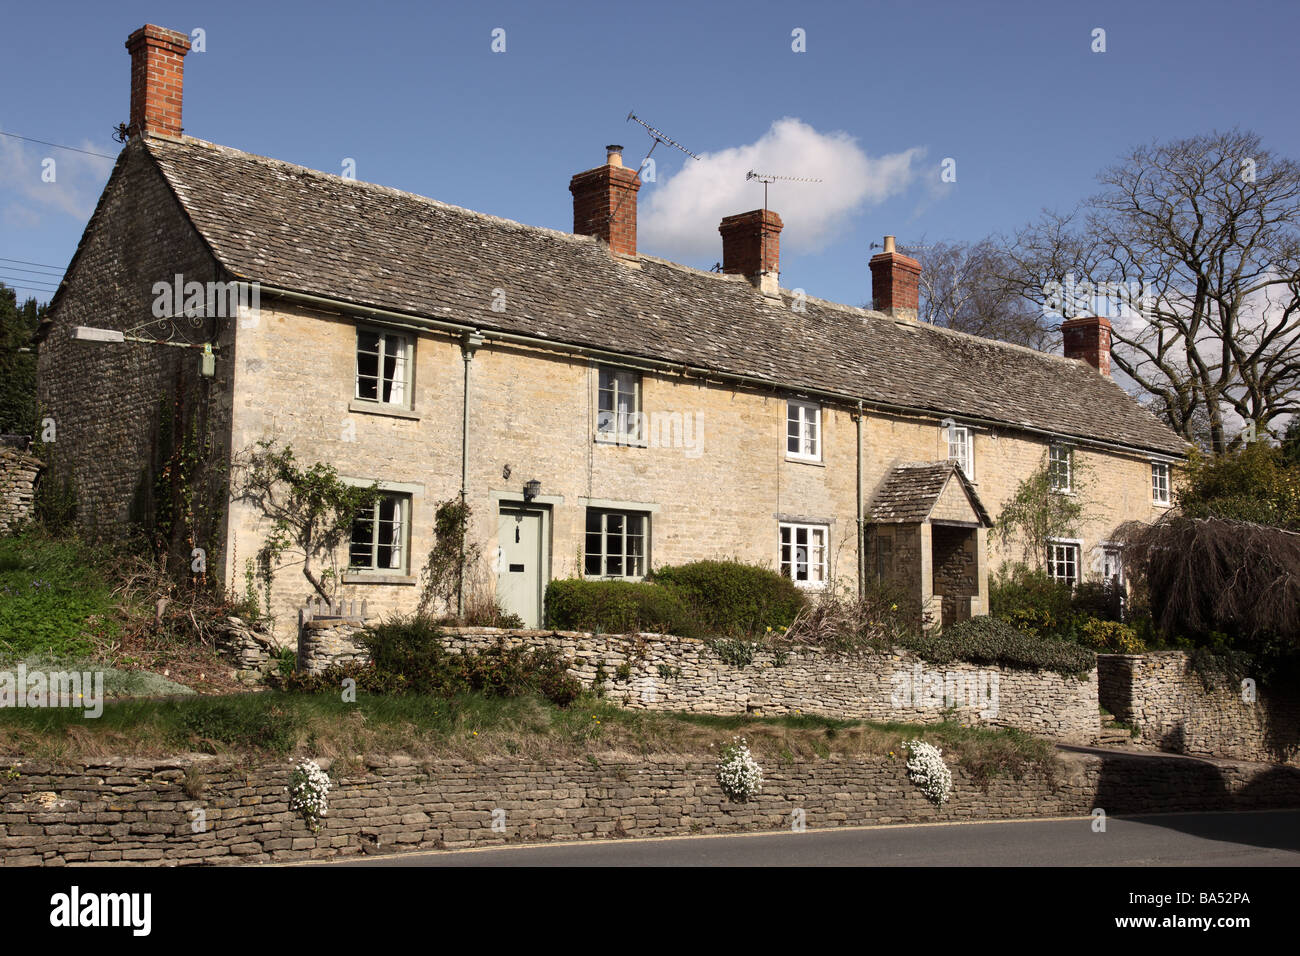 Terraced row of Cotswold stone houses in Bibury, Gloucestershire, UK Stock Photo